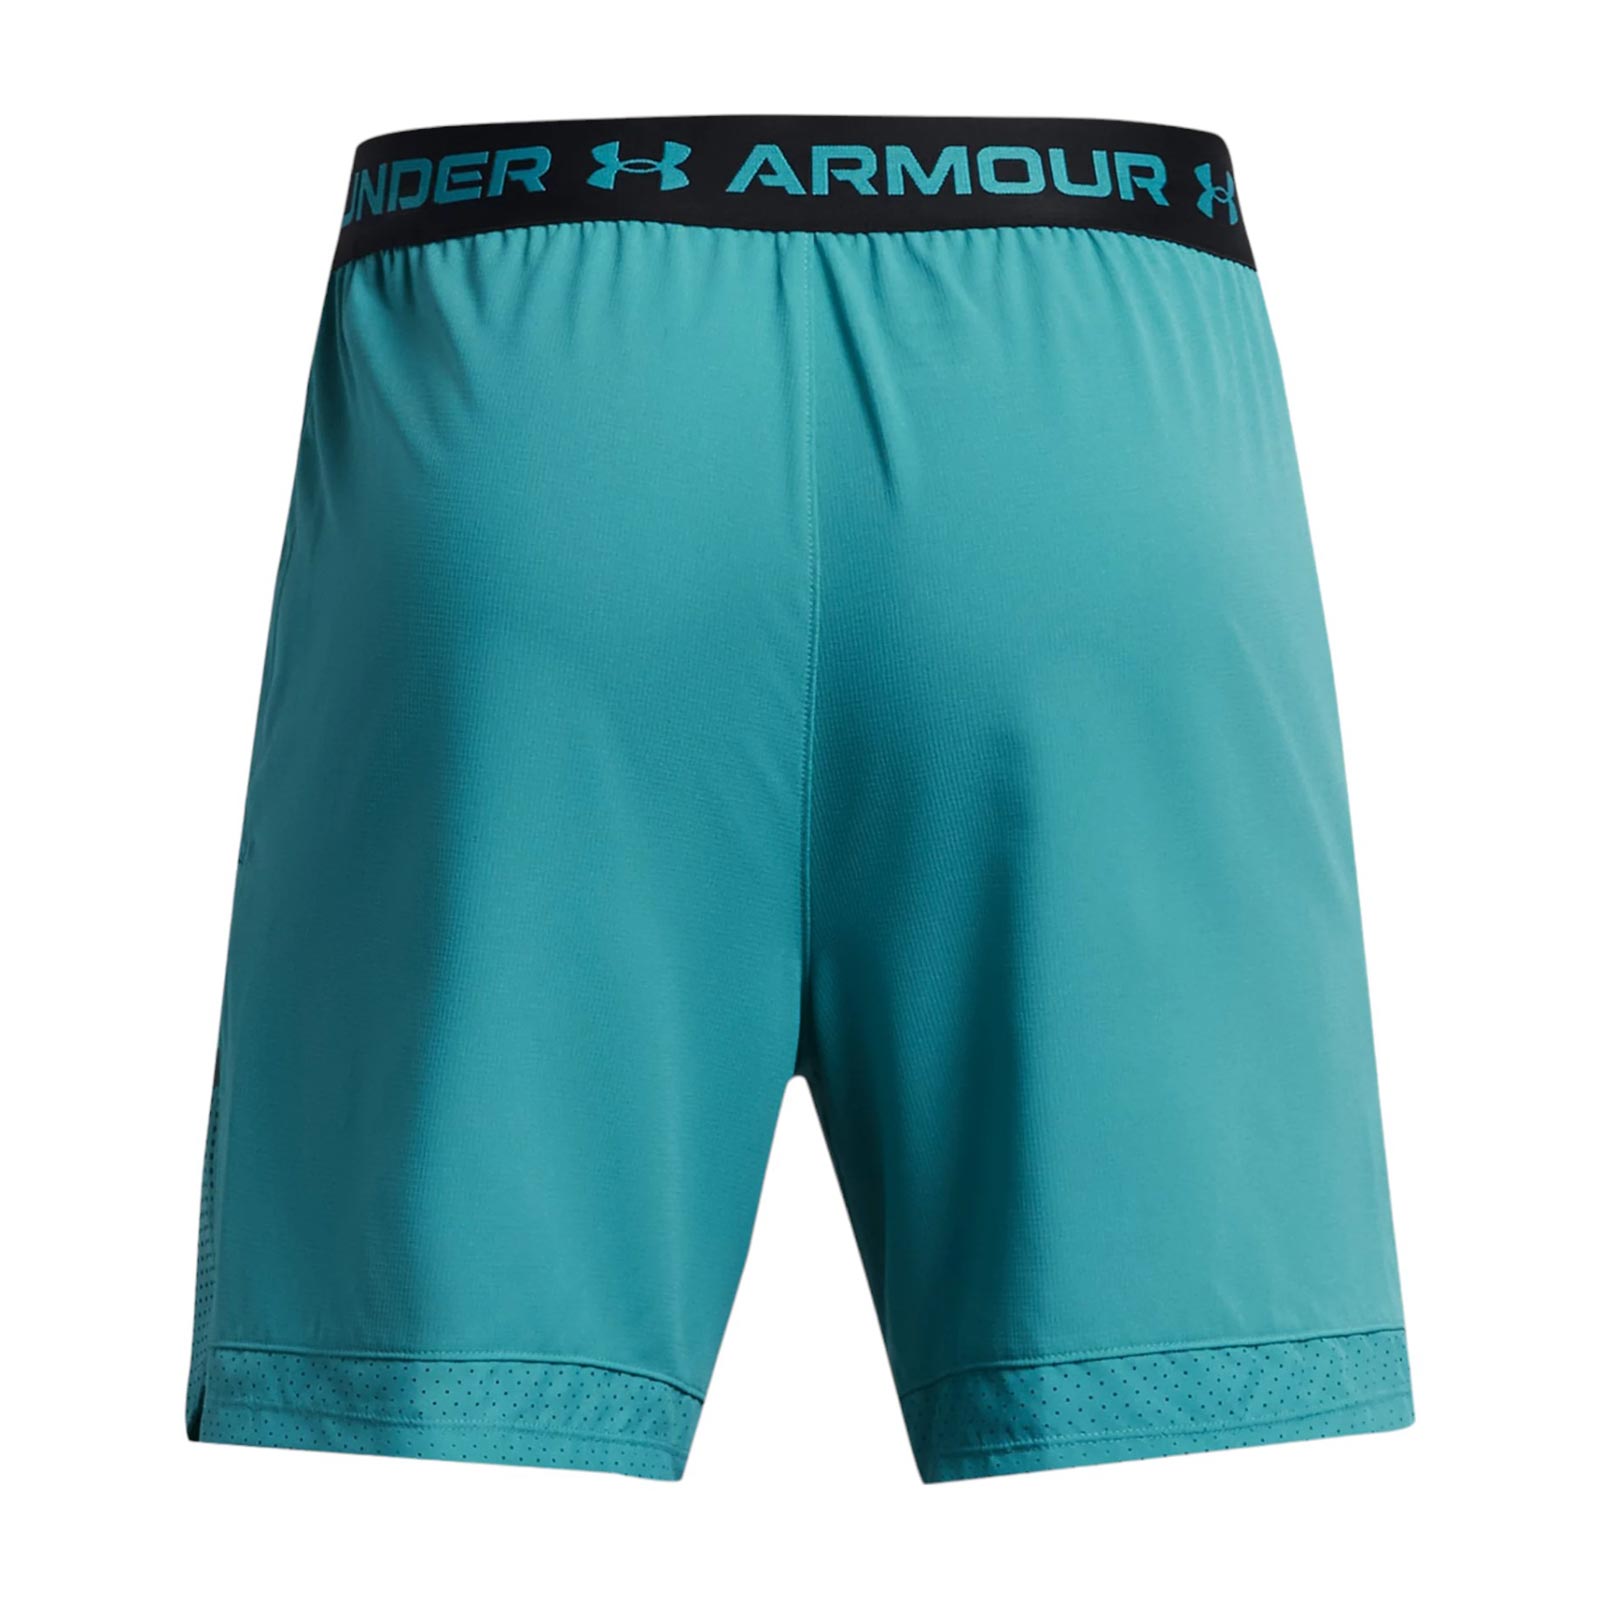 UNDER ARMOUR VANISH WOVEN 6-INCH MENS SHORTS